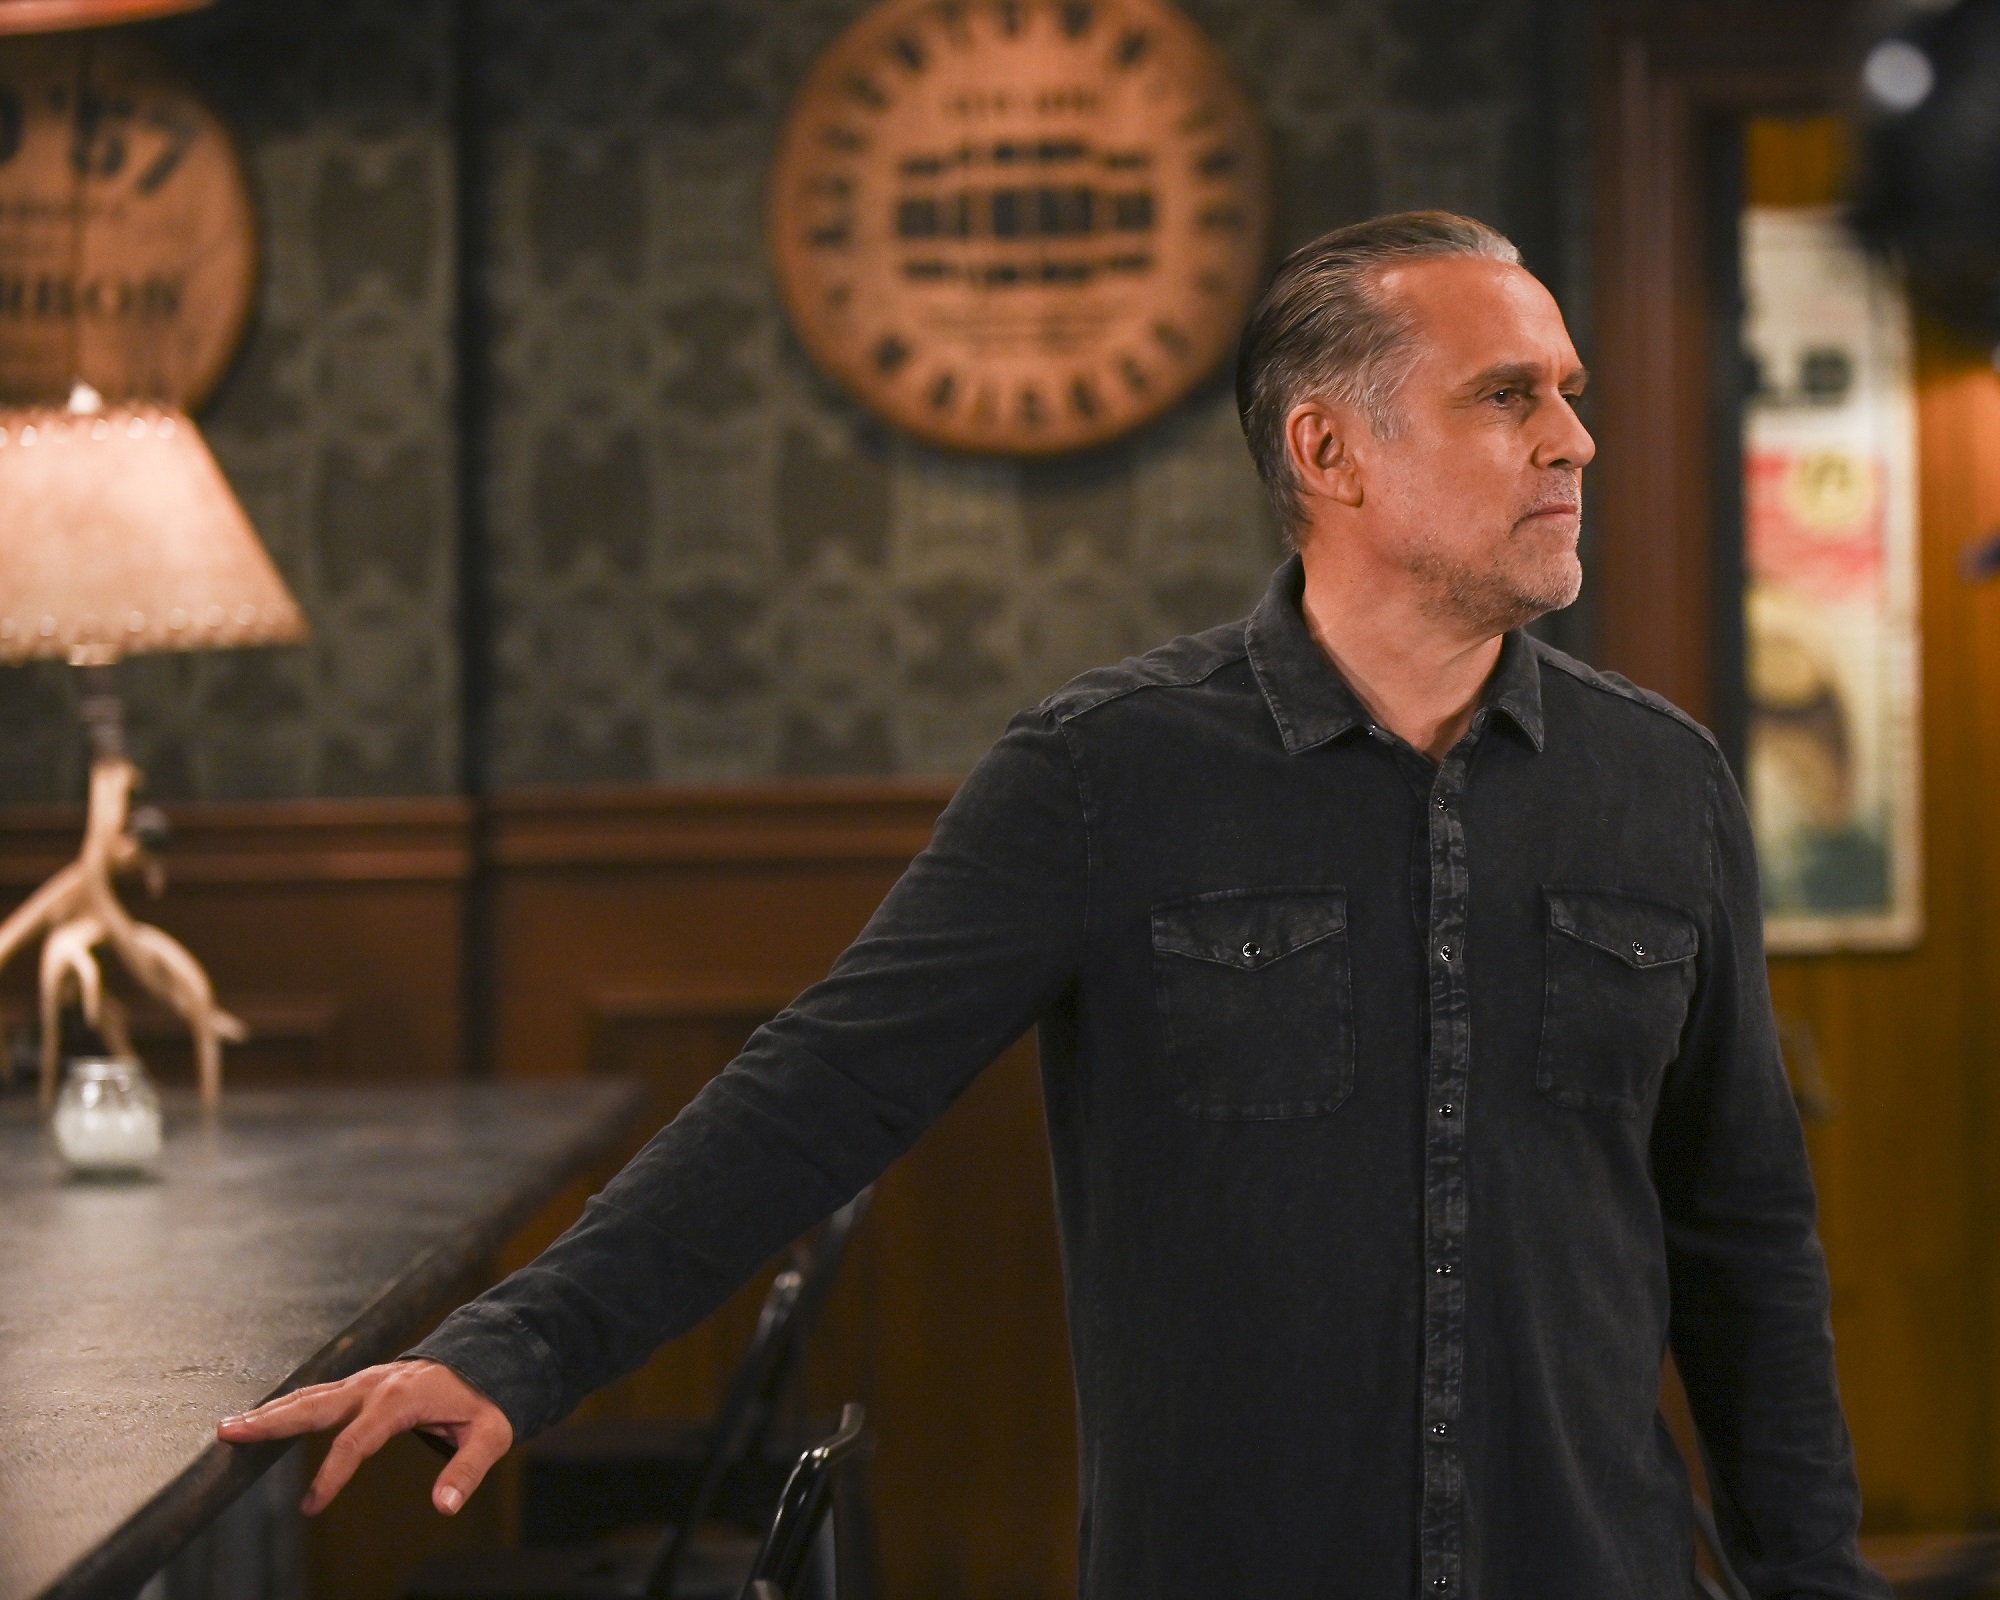 General Hospital spoilers focus on Maurice Benard, pictured here in a black shirt, who plays Sonny/Mike (Smike)